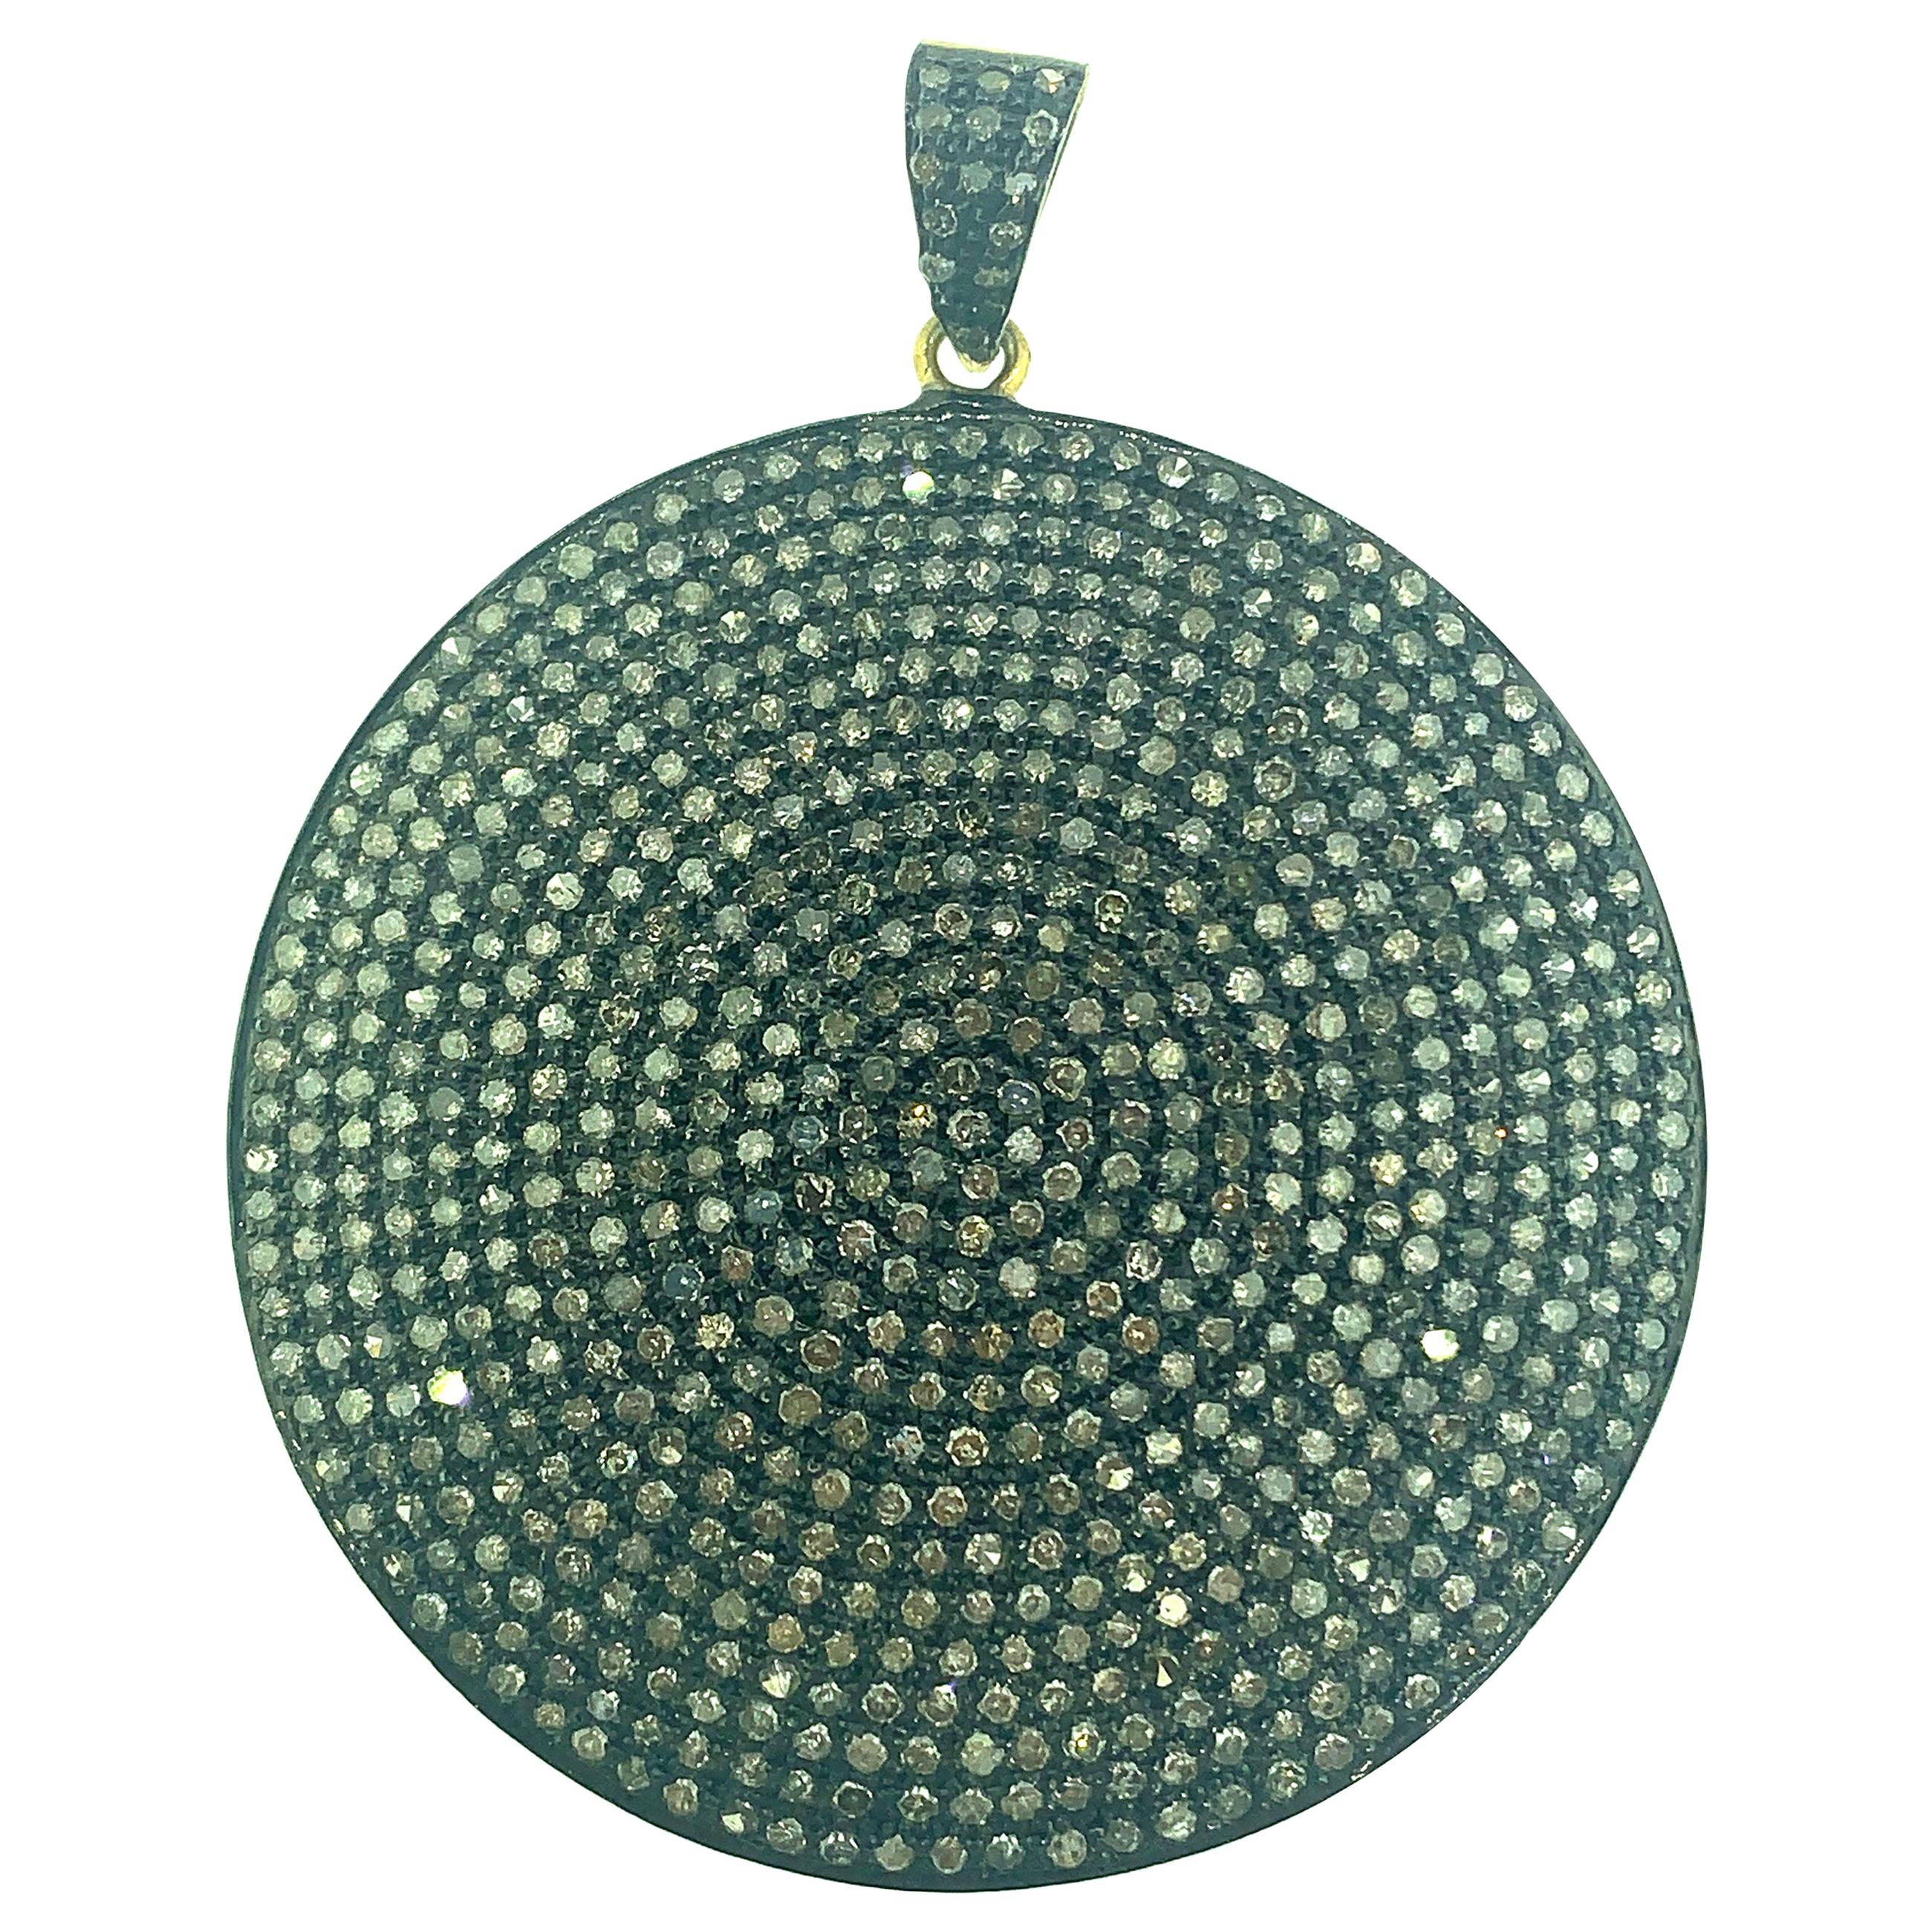 6.15Ct Round Pave Diamond Disc Pendant in Oxidized Sterling Silver, 14Kt Gold For Sale